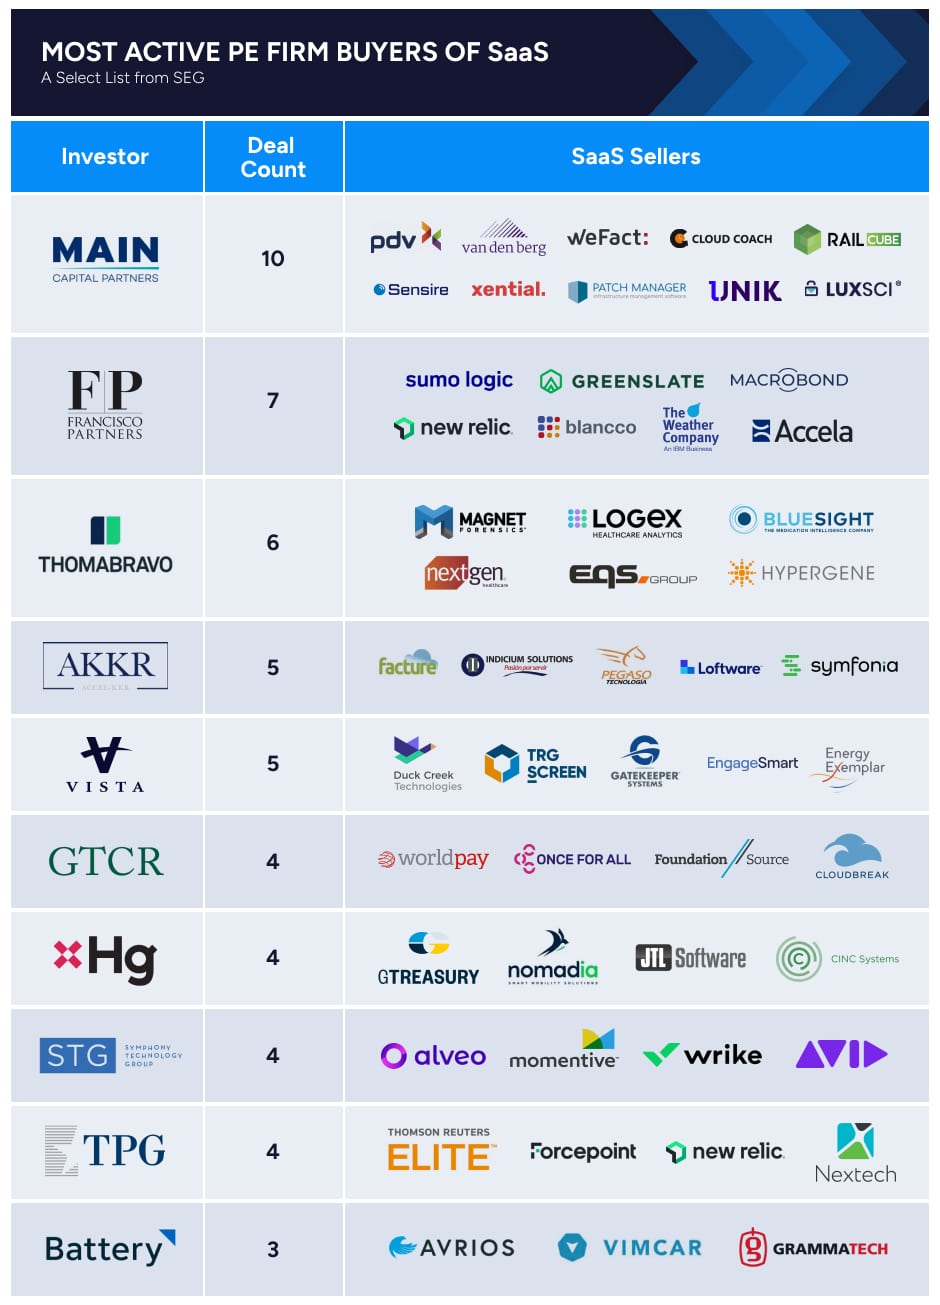 A graphic showing the most active PE buyers of saas with logos